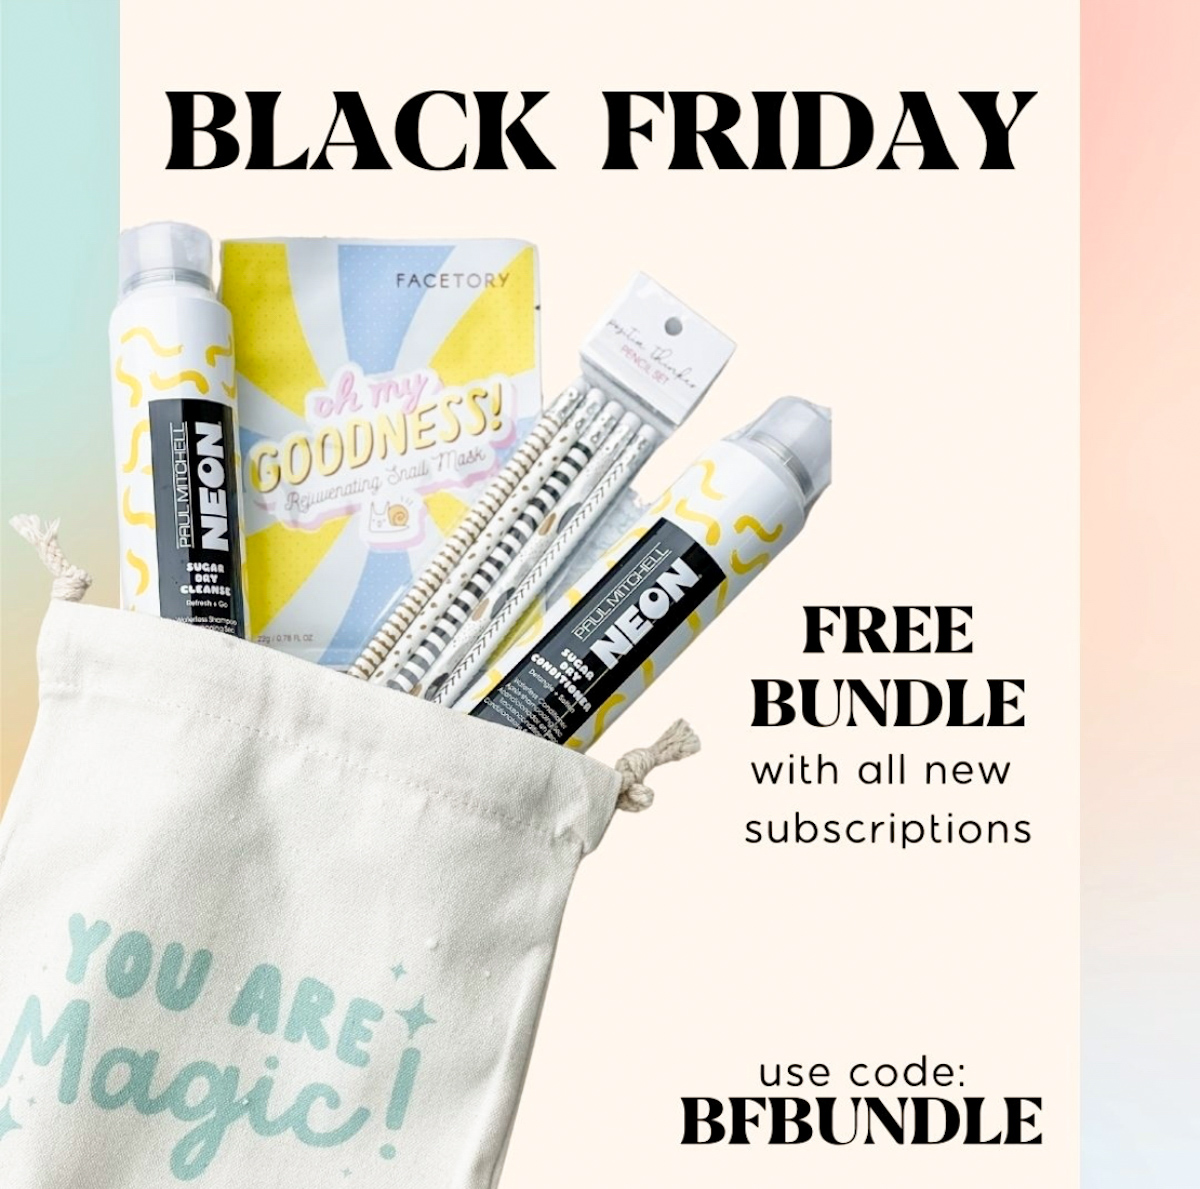 Strong Self(ie) has a Black Friday 2021 Deal available now – Get a free bundle with your subscription